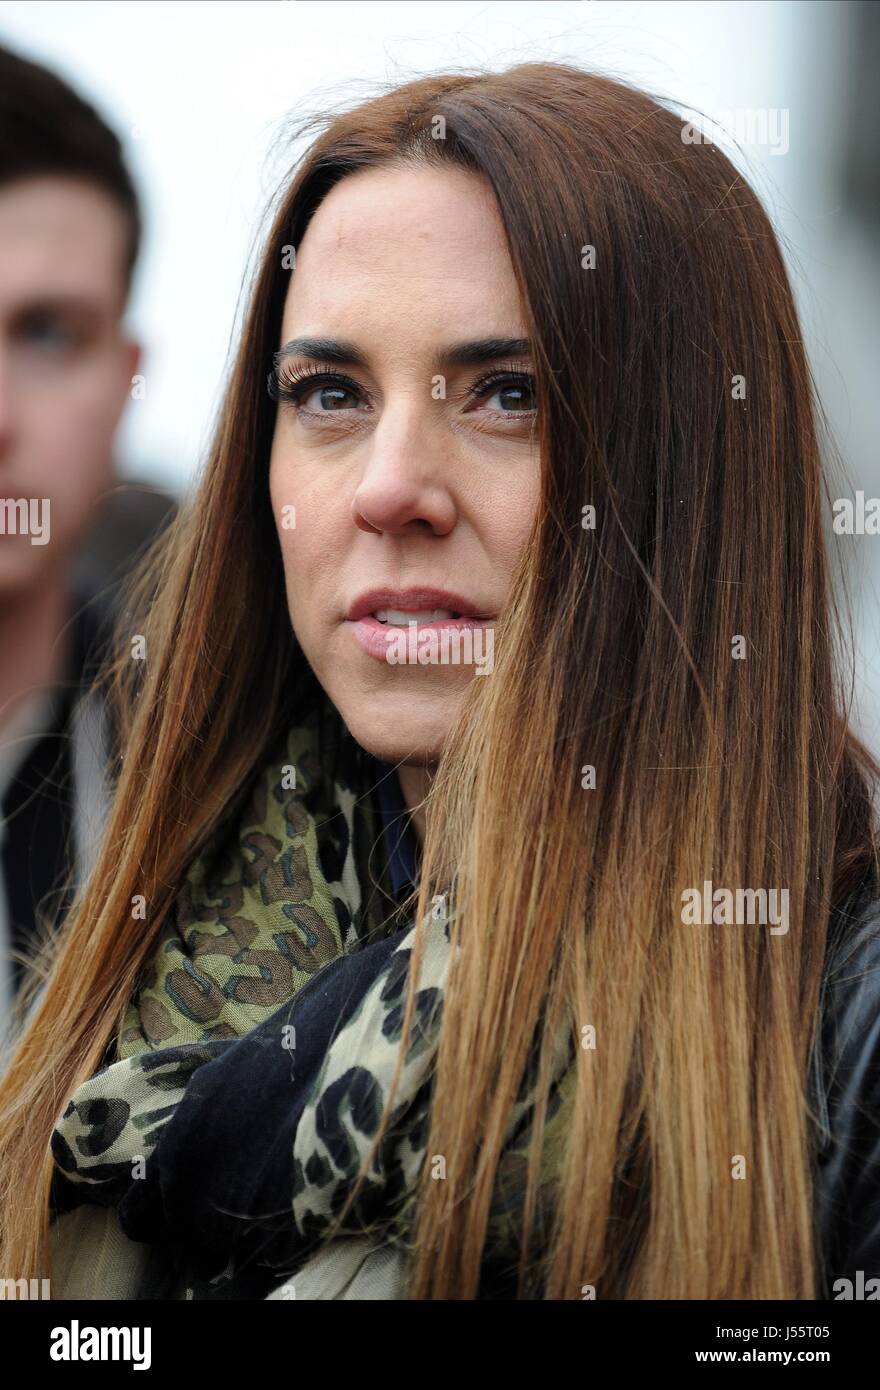 MELANIE C PAYS HER RESPECTS AT LIVERPOOL FC V MANCHESTER CITY ANFIELD LIVERPOOL ENGLAND 13 April 2014 Stock Photo